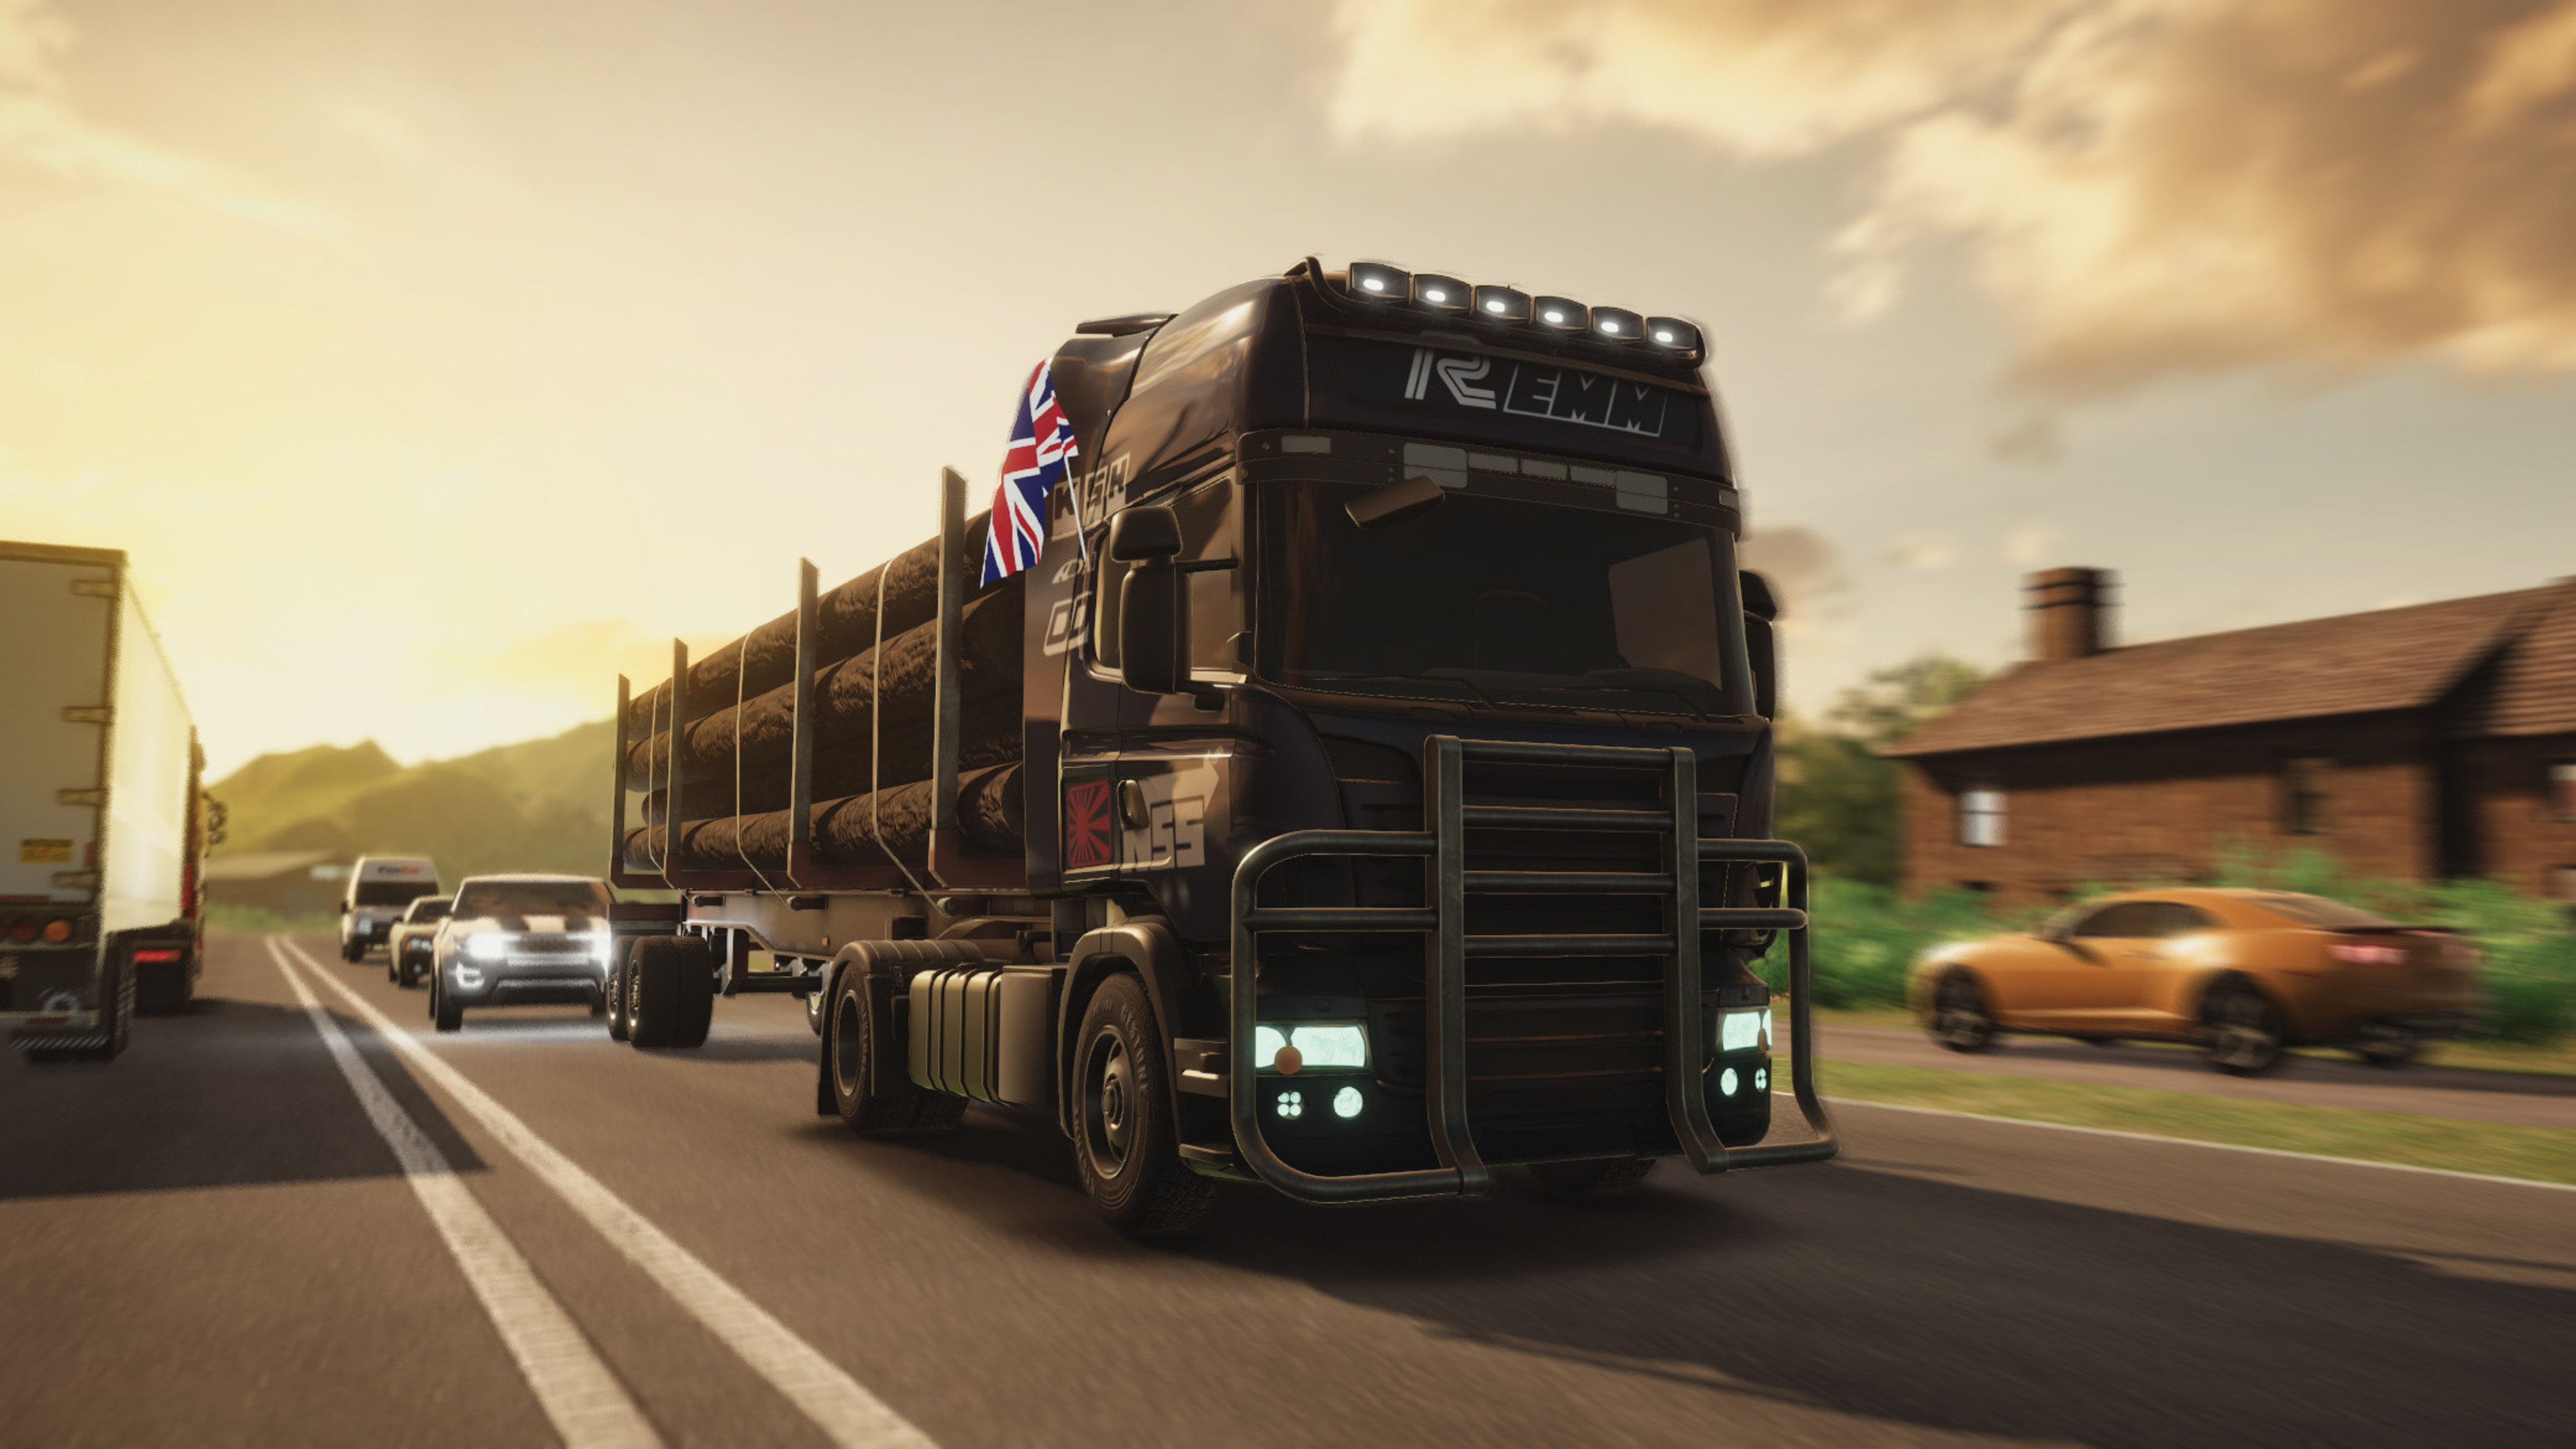 Is Euro Truck Simulator 2 Coming To PS4? - PlayStation Universe